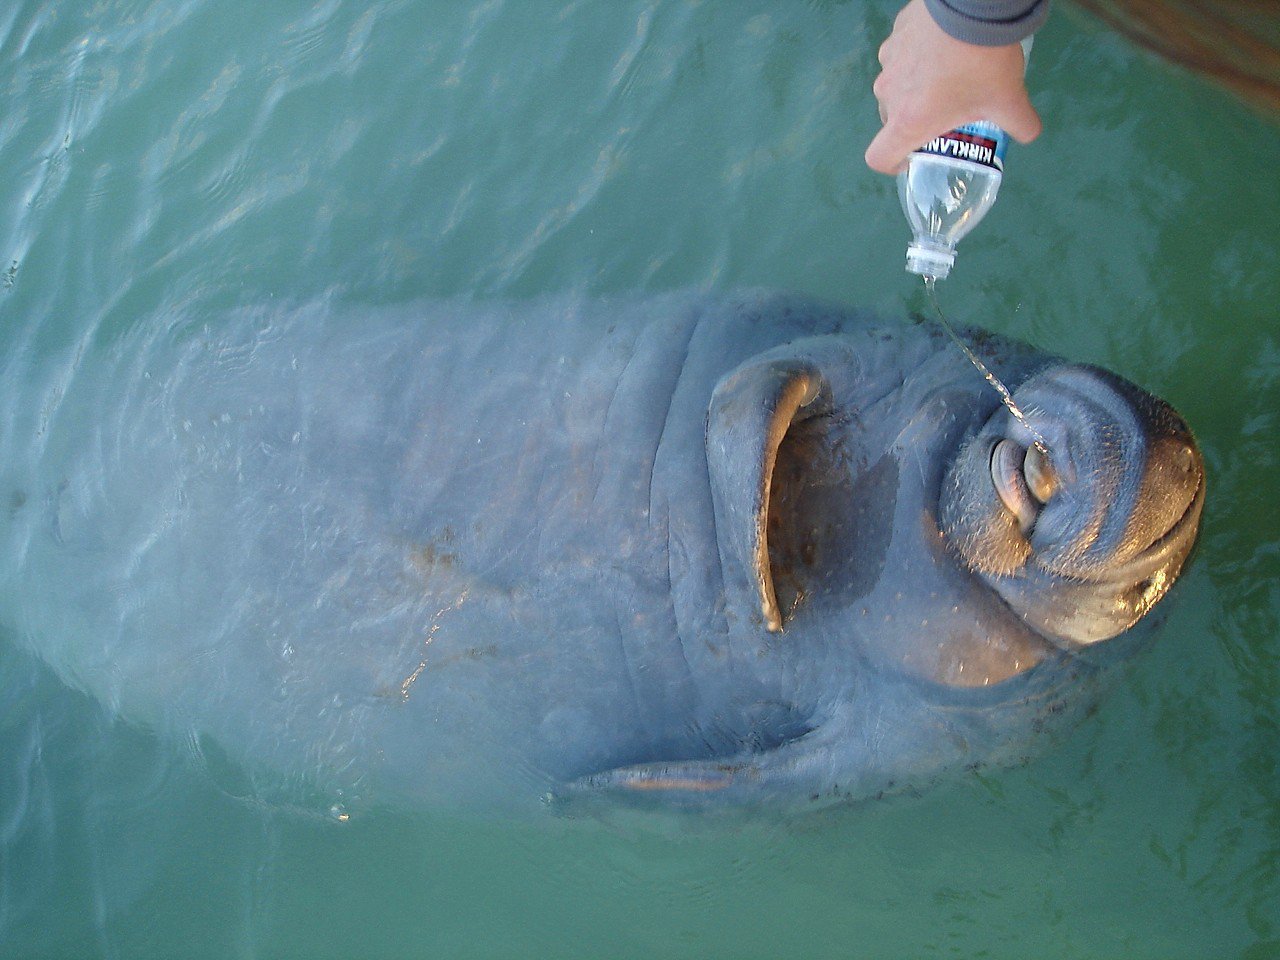 Manatee in the wild